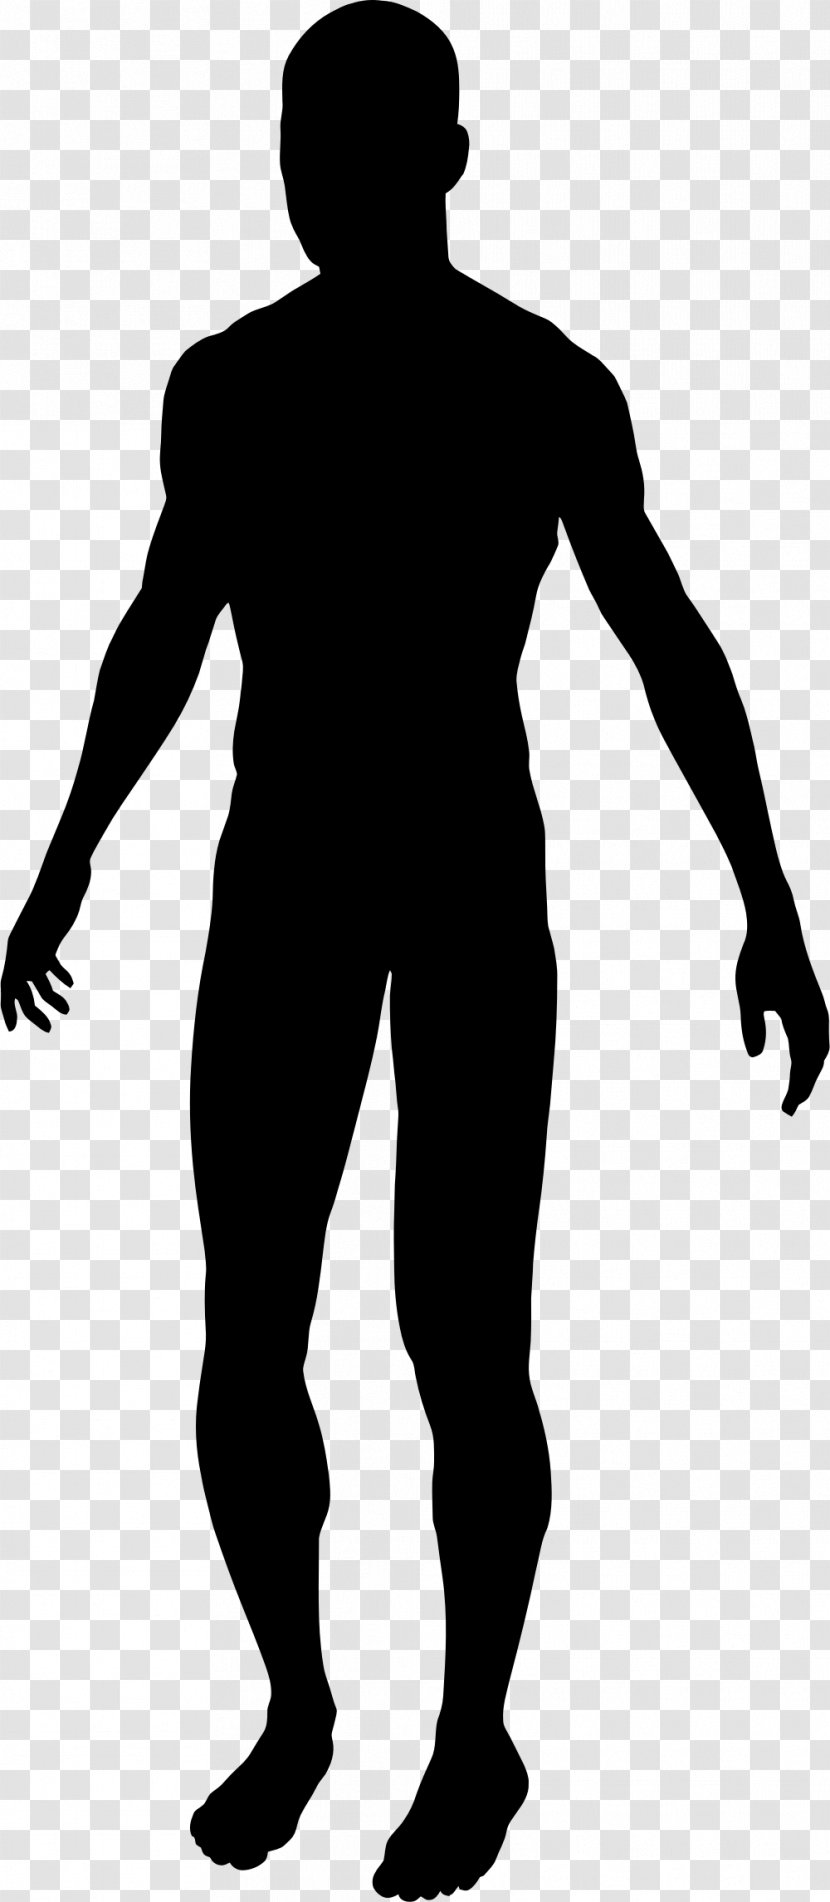 Stock Photography Clip Art - Man - Silhouette Transparent PNG